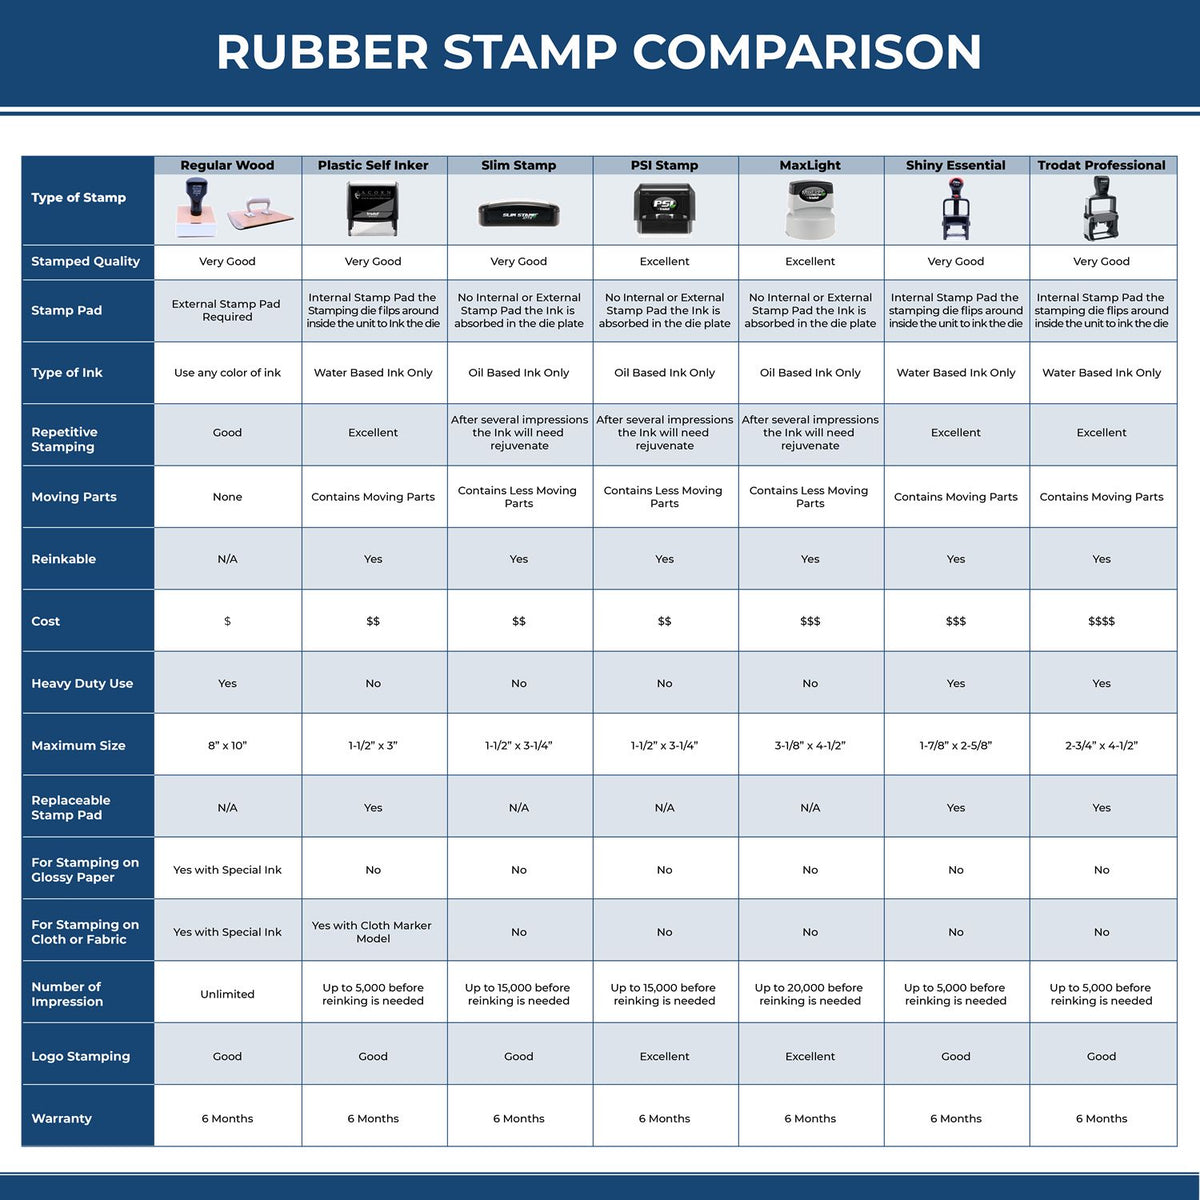 Large Confidential with Logo Rubber Stamp 4874R Rubber Stamp Comparison